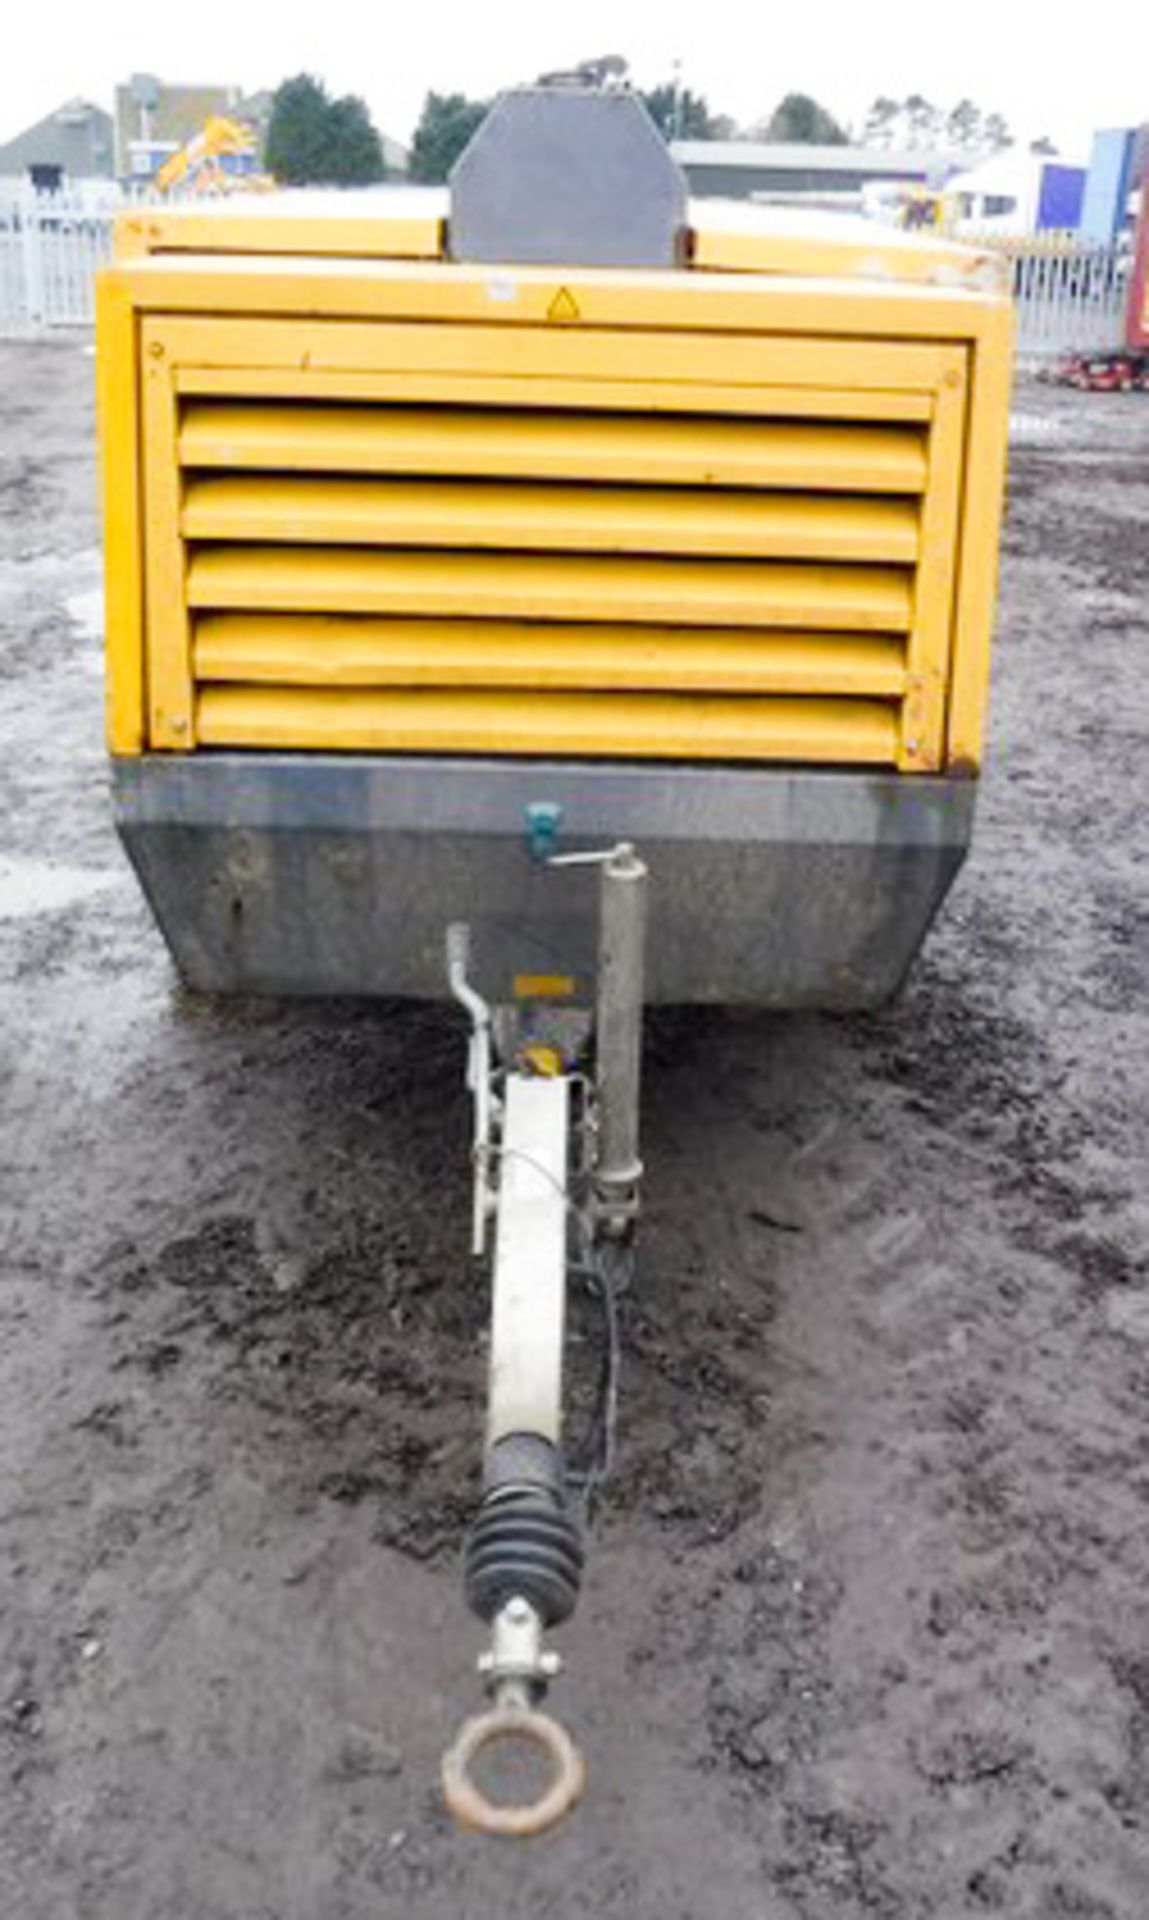 2009 ATLAS COPCO COMPRESSOR, XAS186/400CEM, S/N 768651, 3582HRS (NOT VERIFIED) - Image 9 of 12